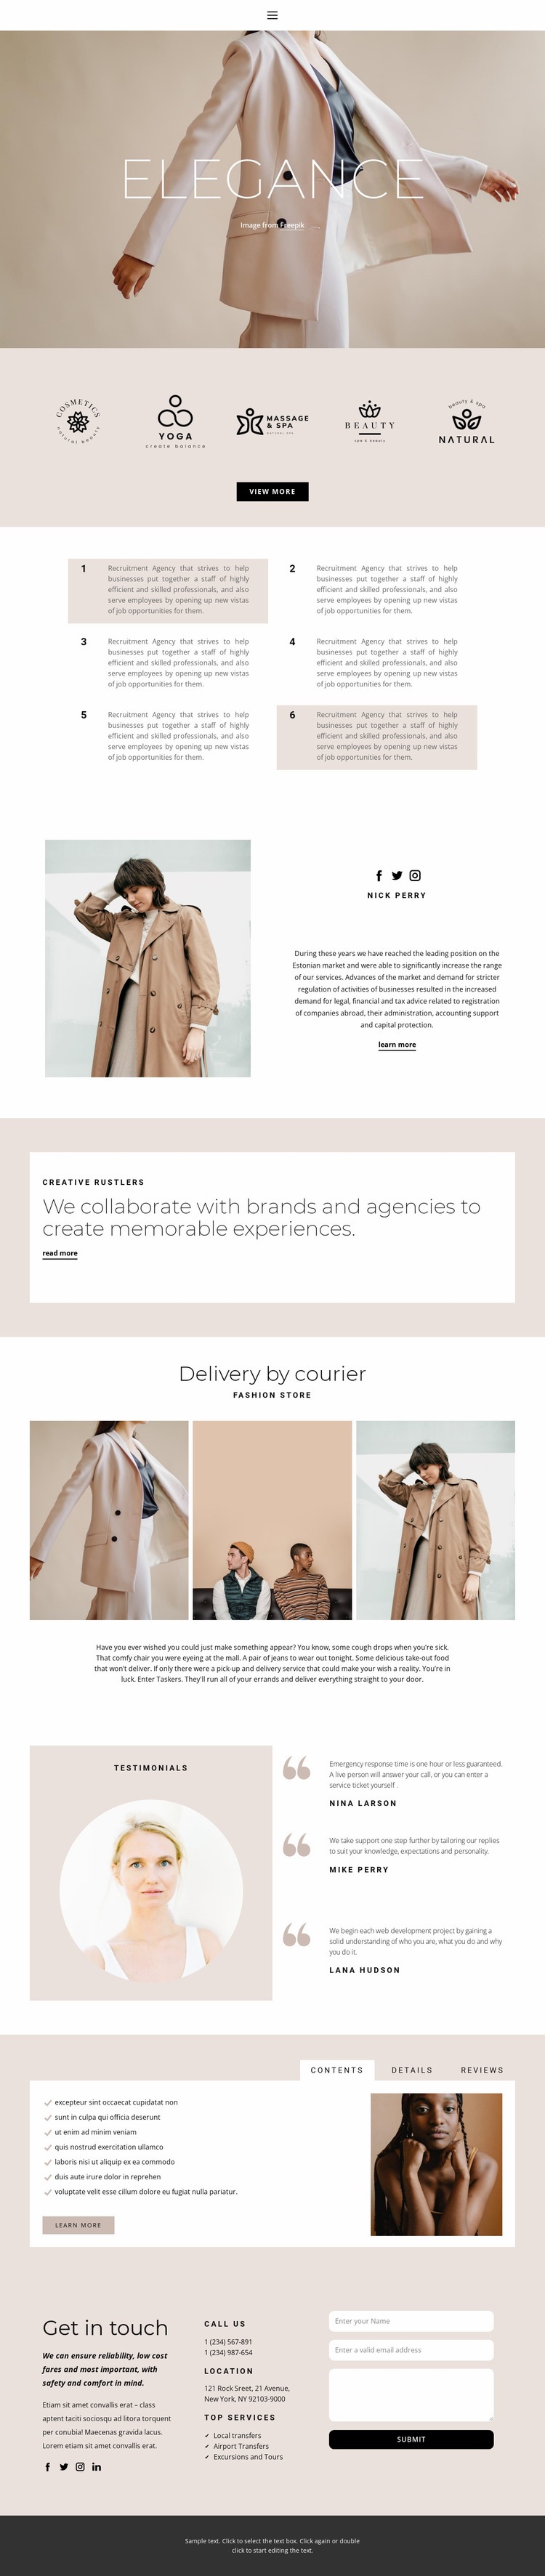 Elegance in fashion Html Code Example